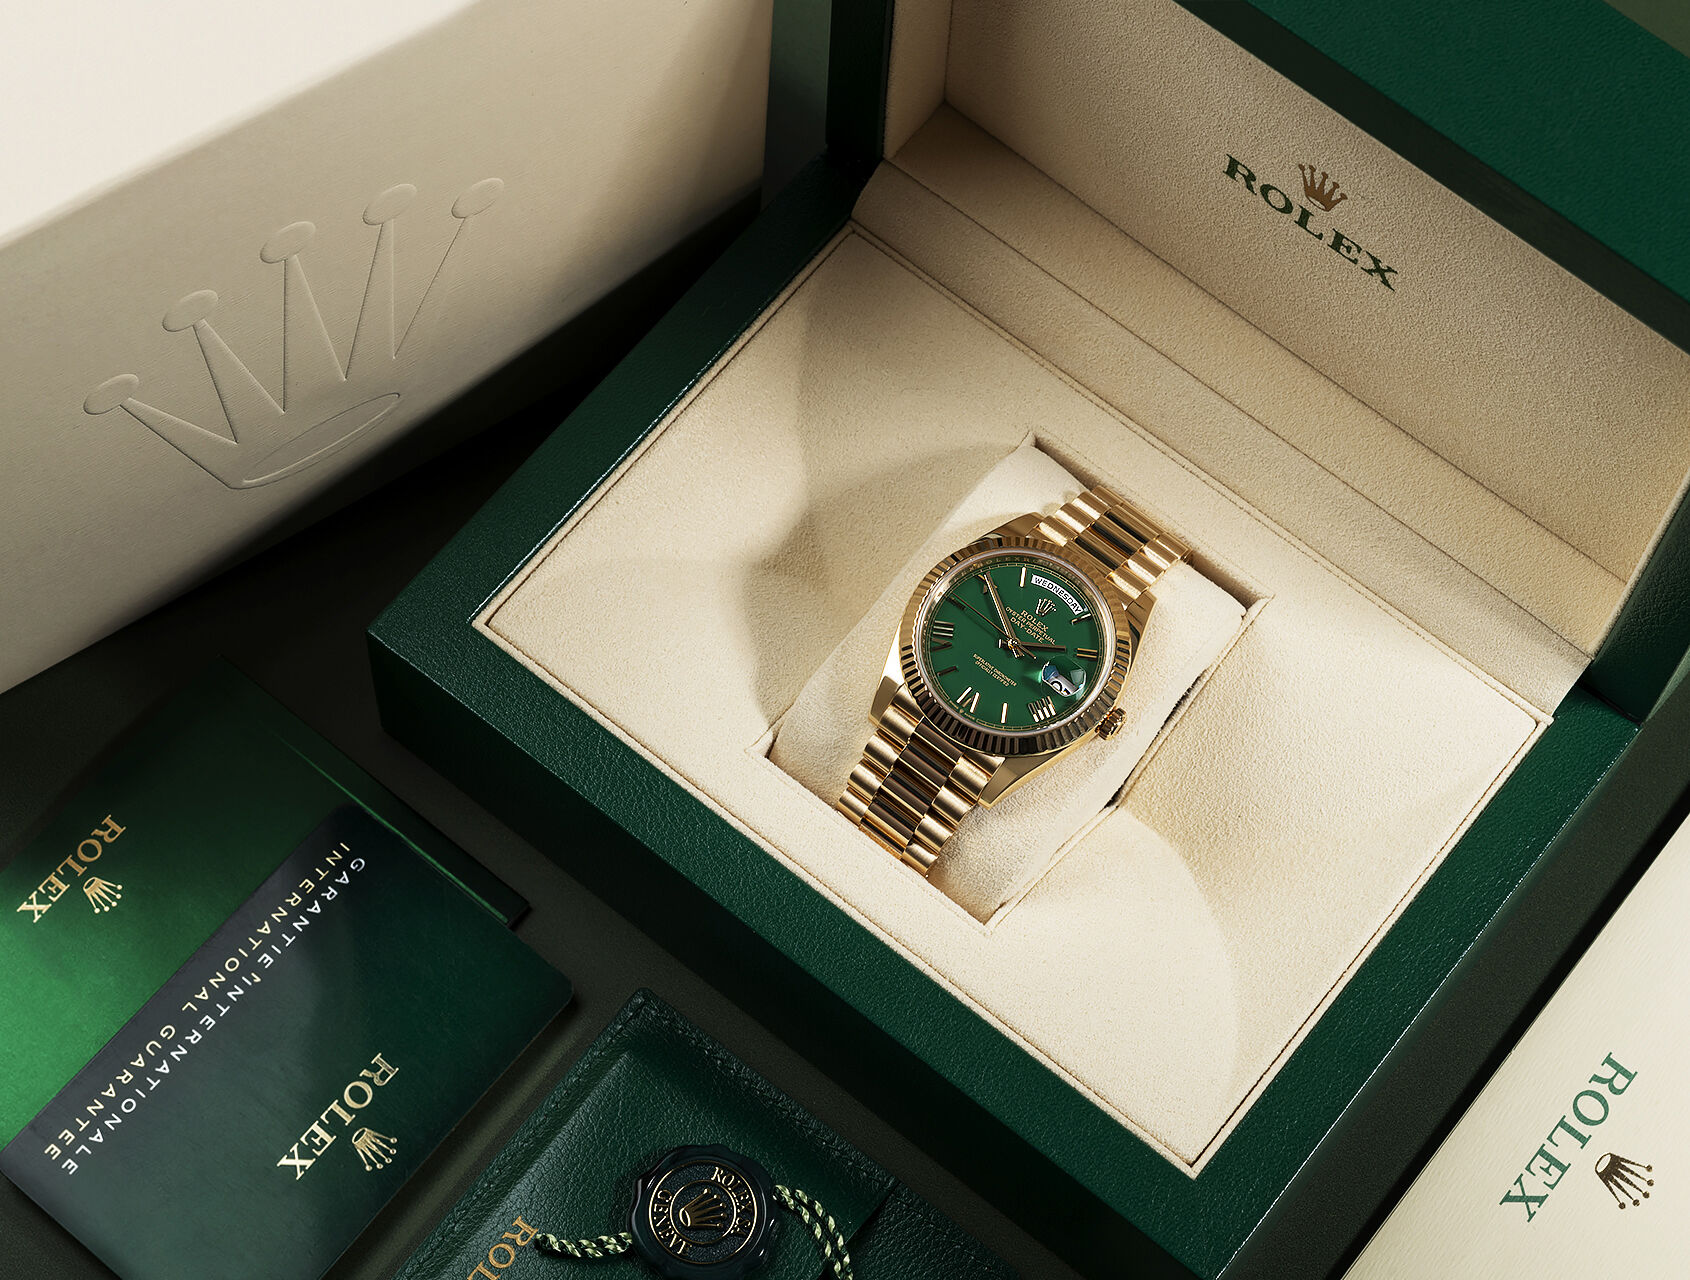 ref 228238 | 228238 - Green Lacquer | Rolex Day-Date